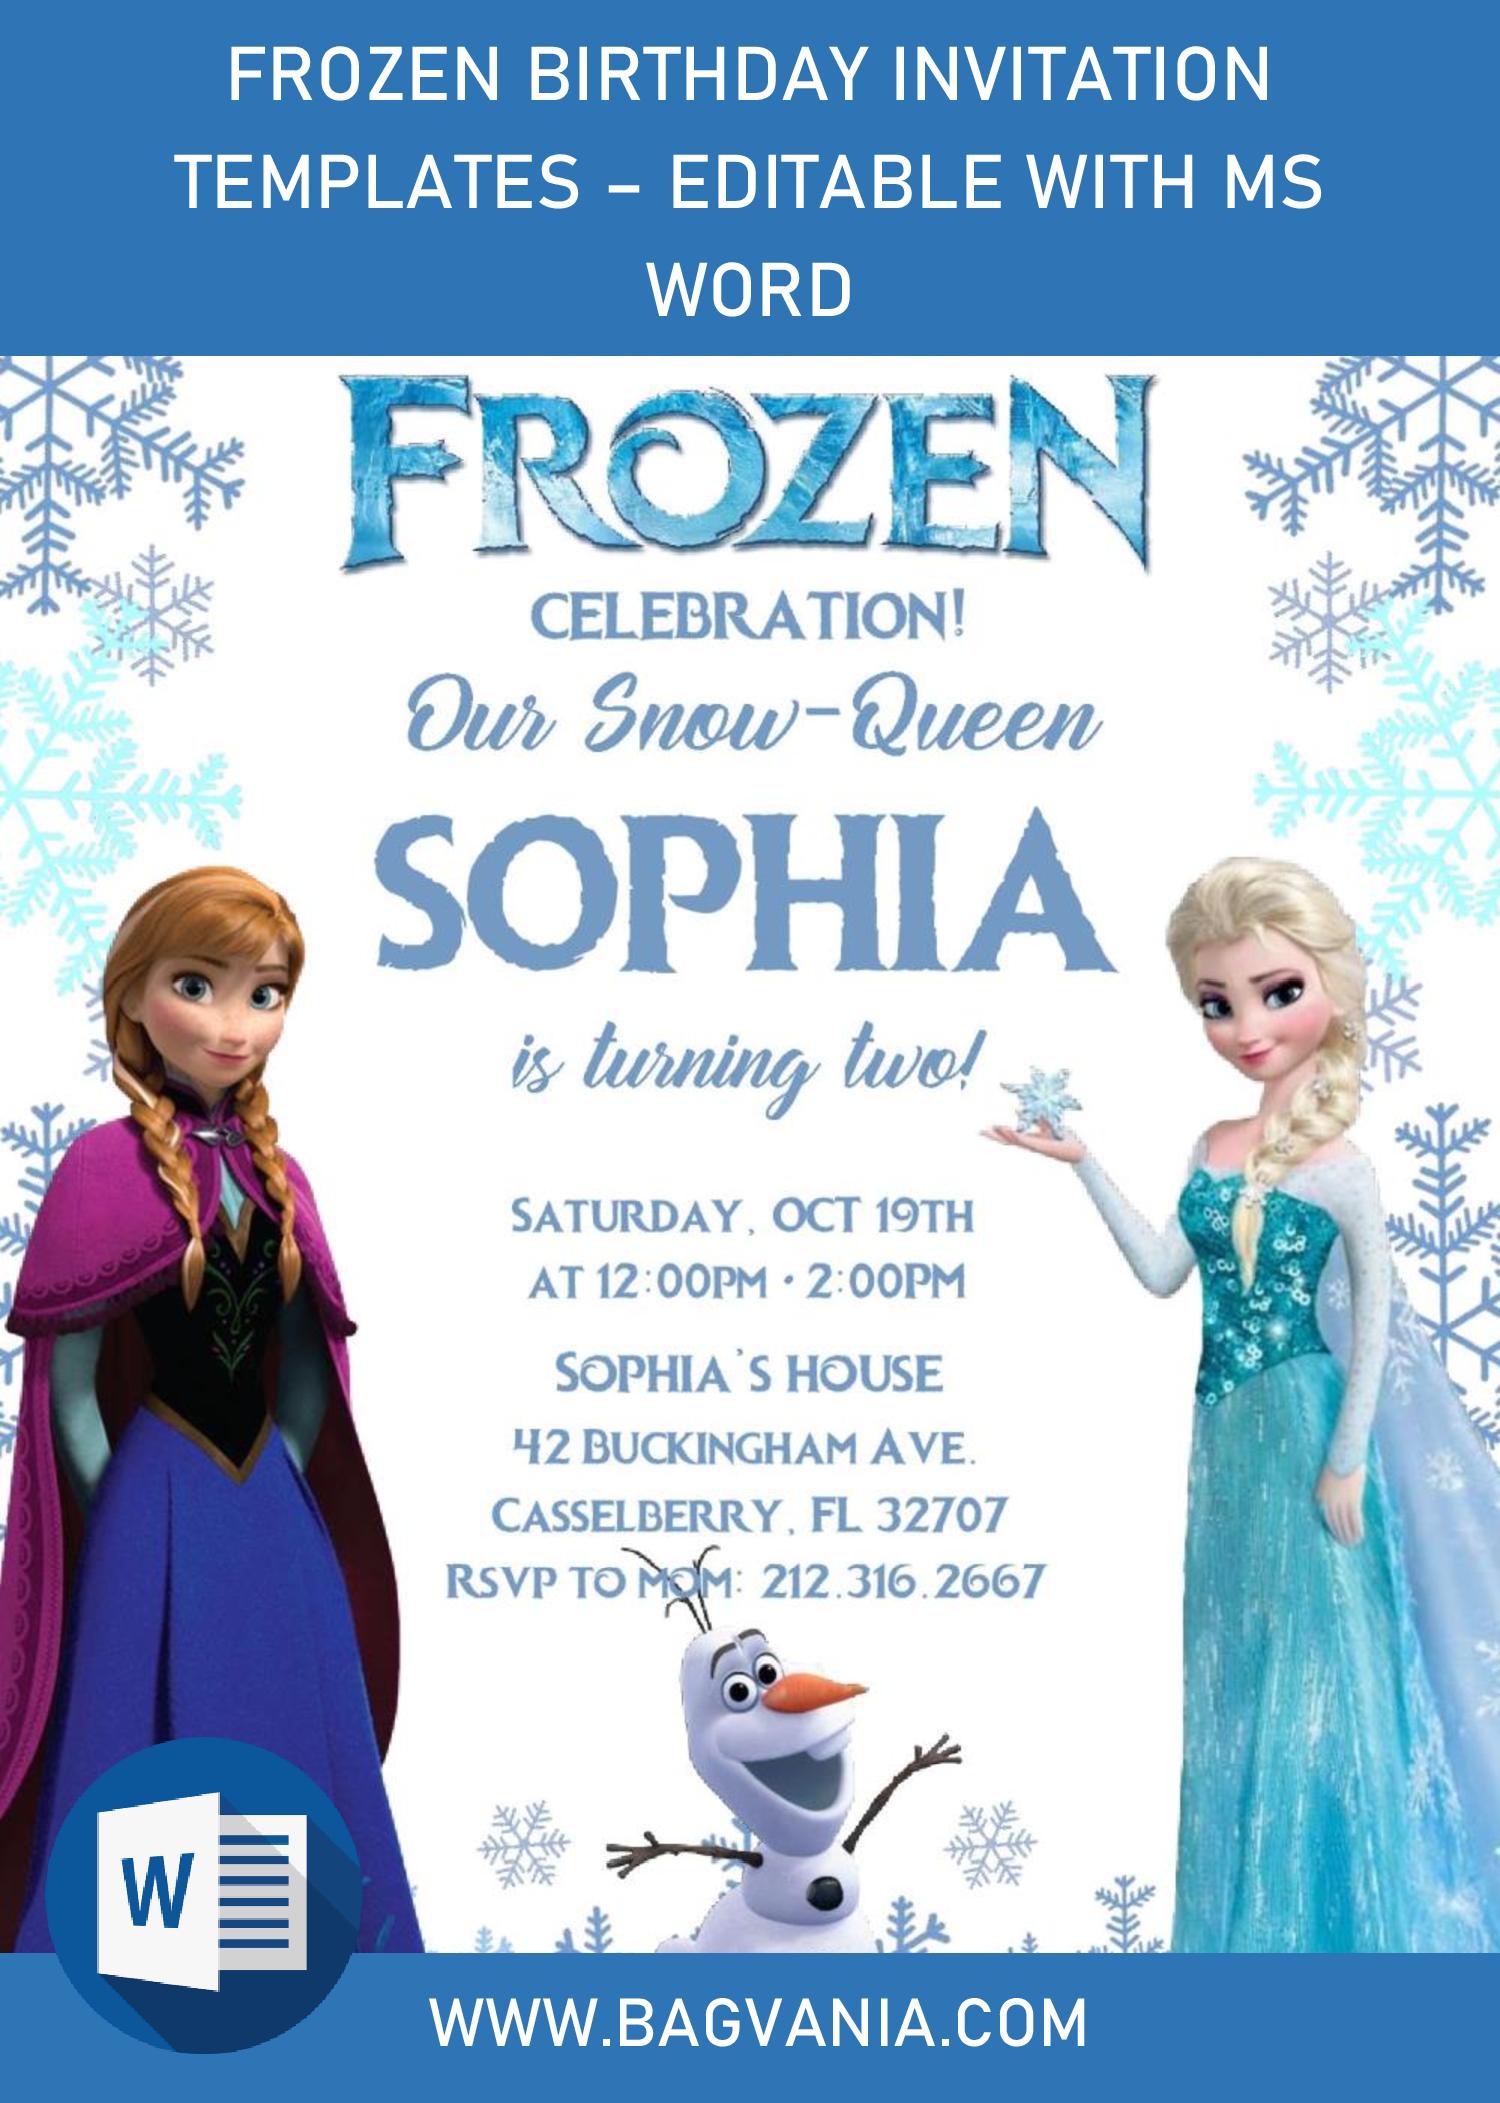 Frozen Invitation Templates – Editable With MS Word  FREE For Frozen Birthday Card Template